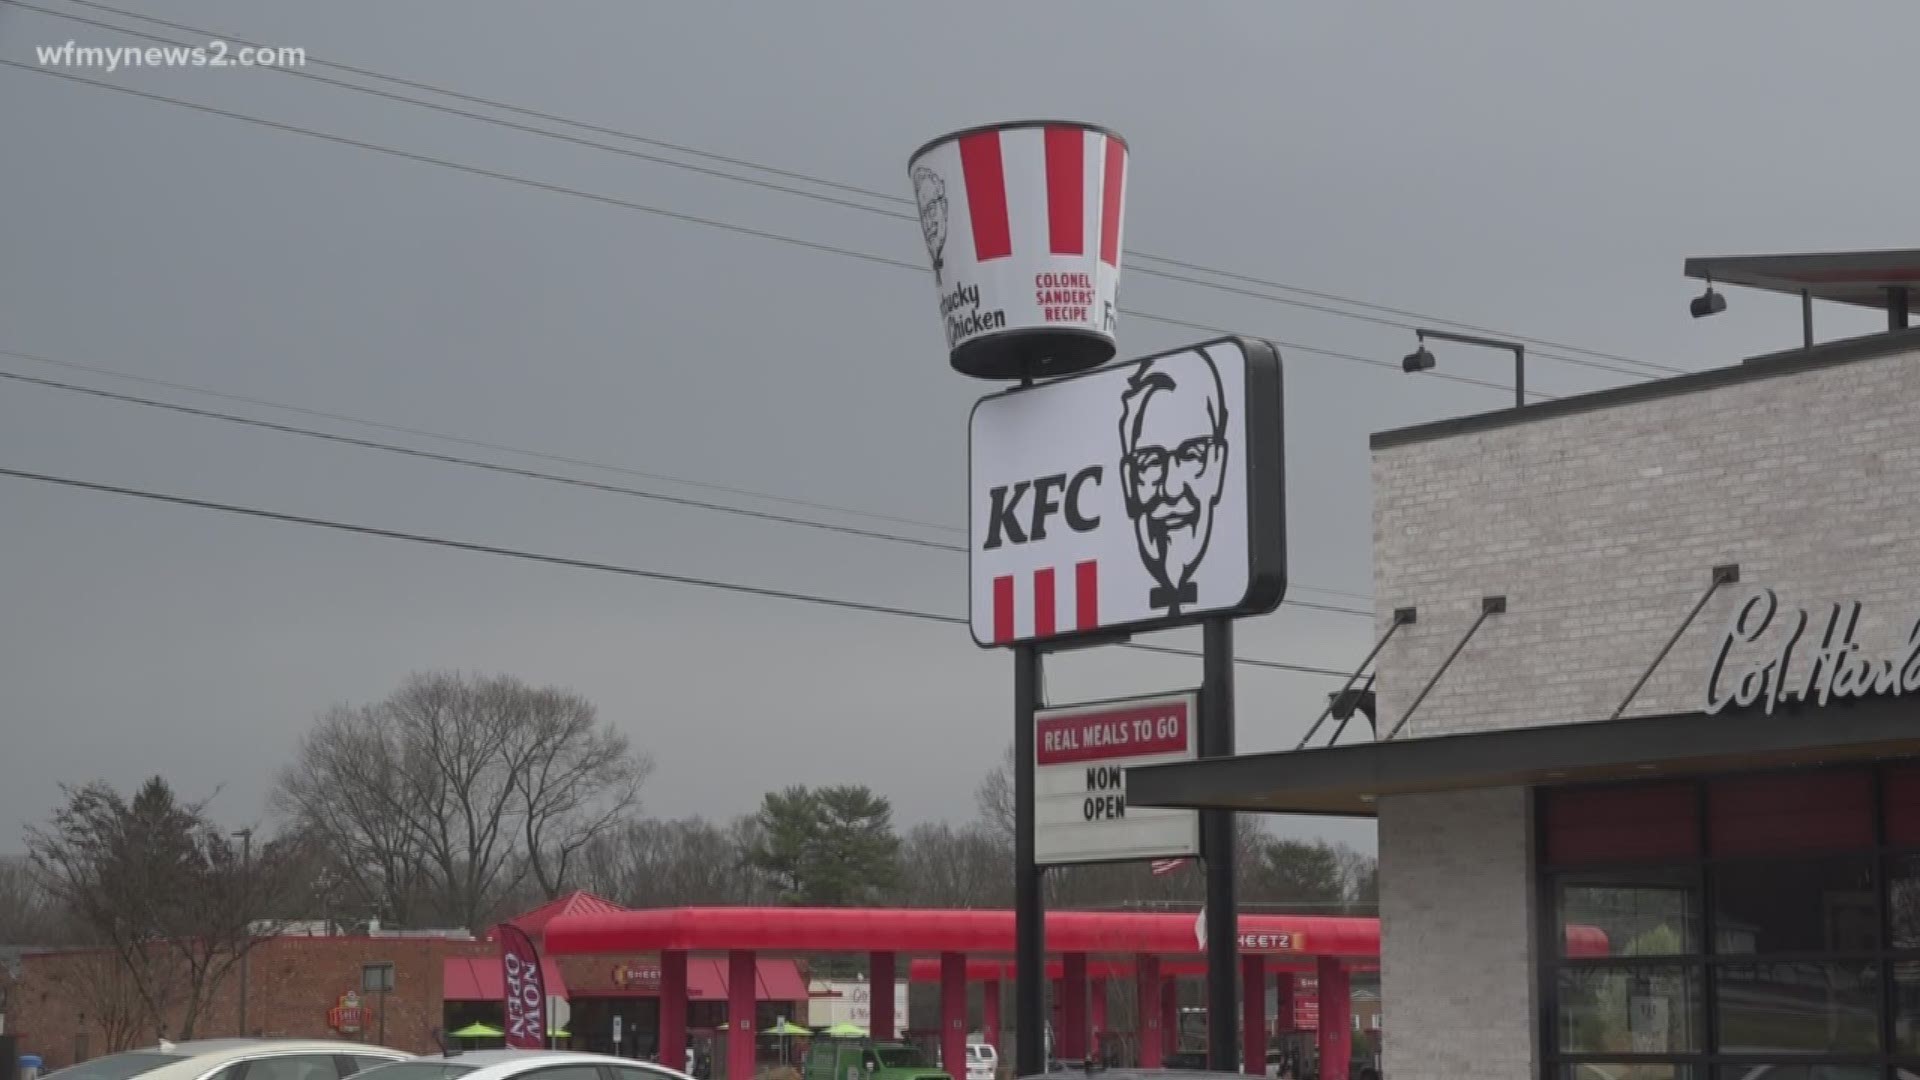 The KFC was leveled during an overnight explosion. Months later, the restaurant is back open after it was rebuilt from the ground up.